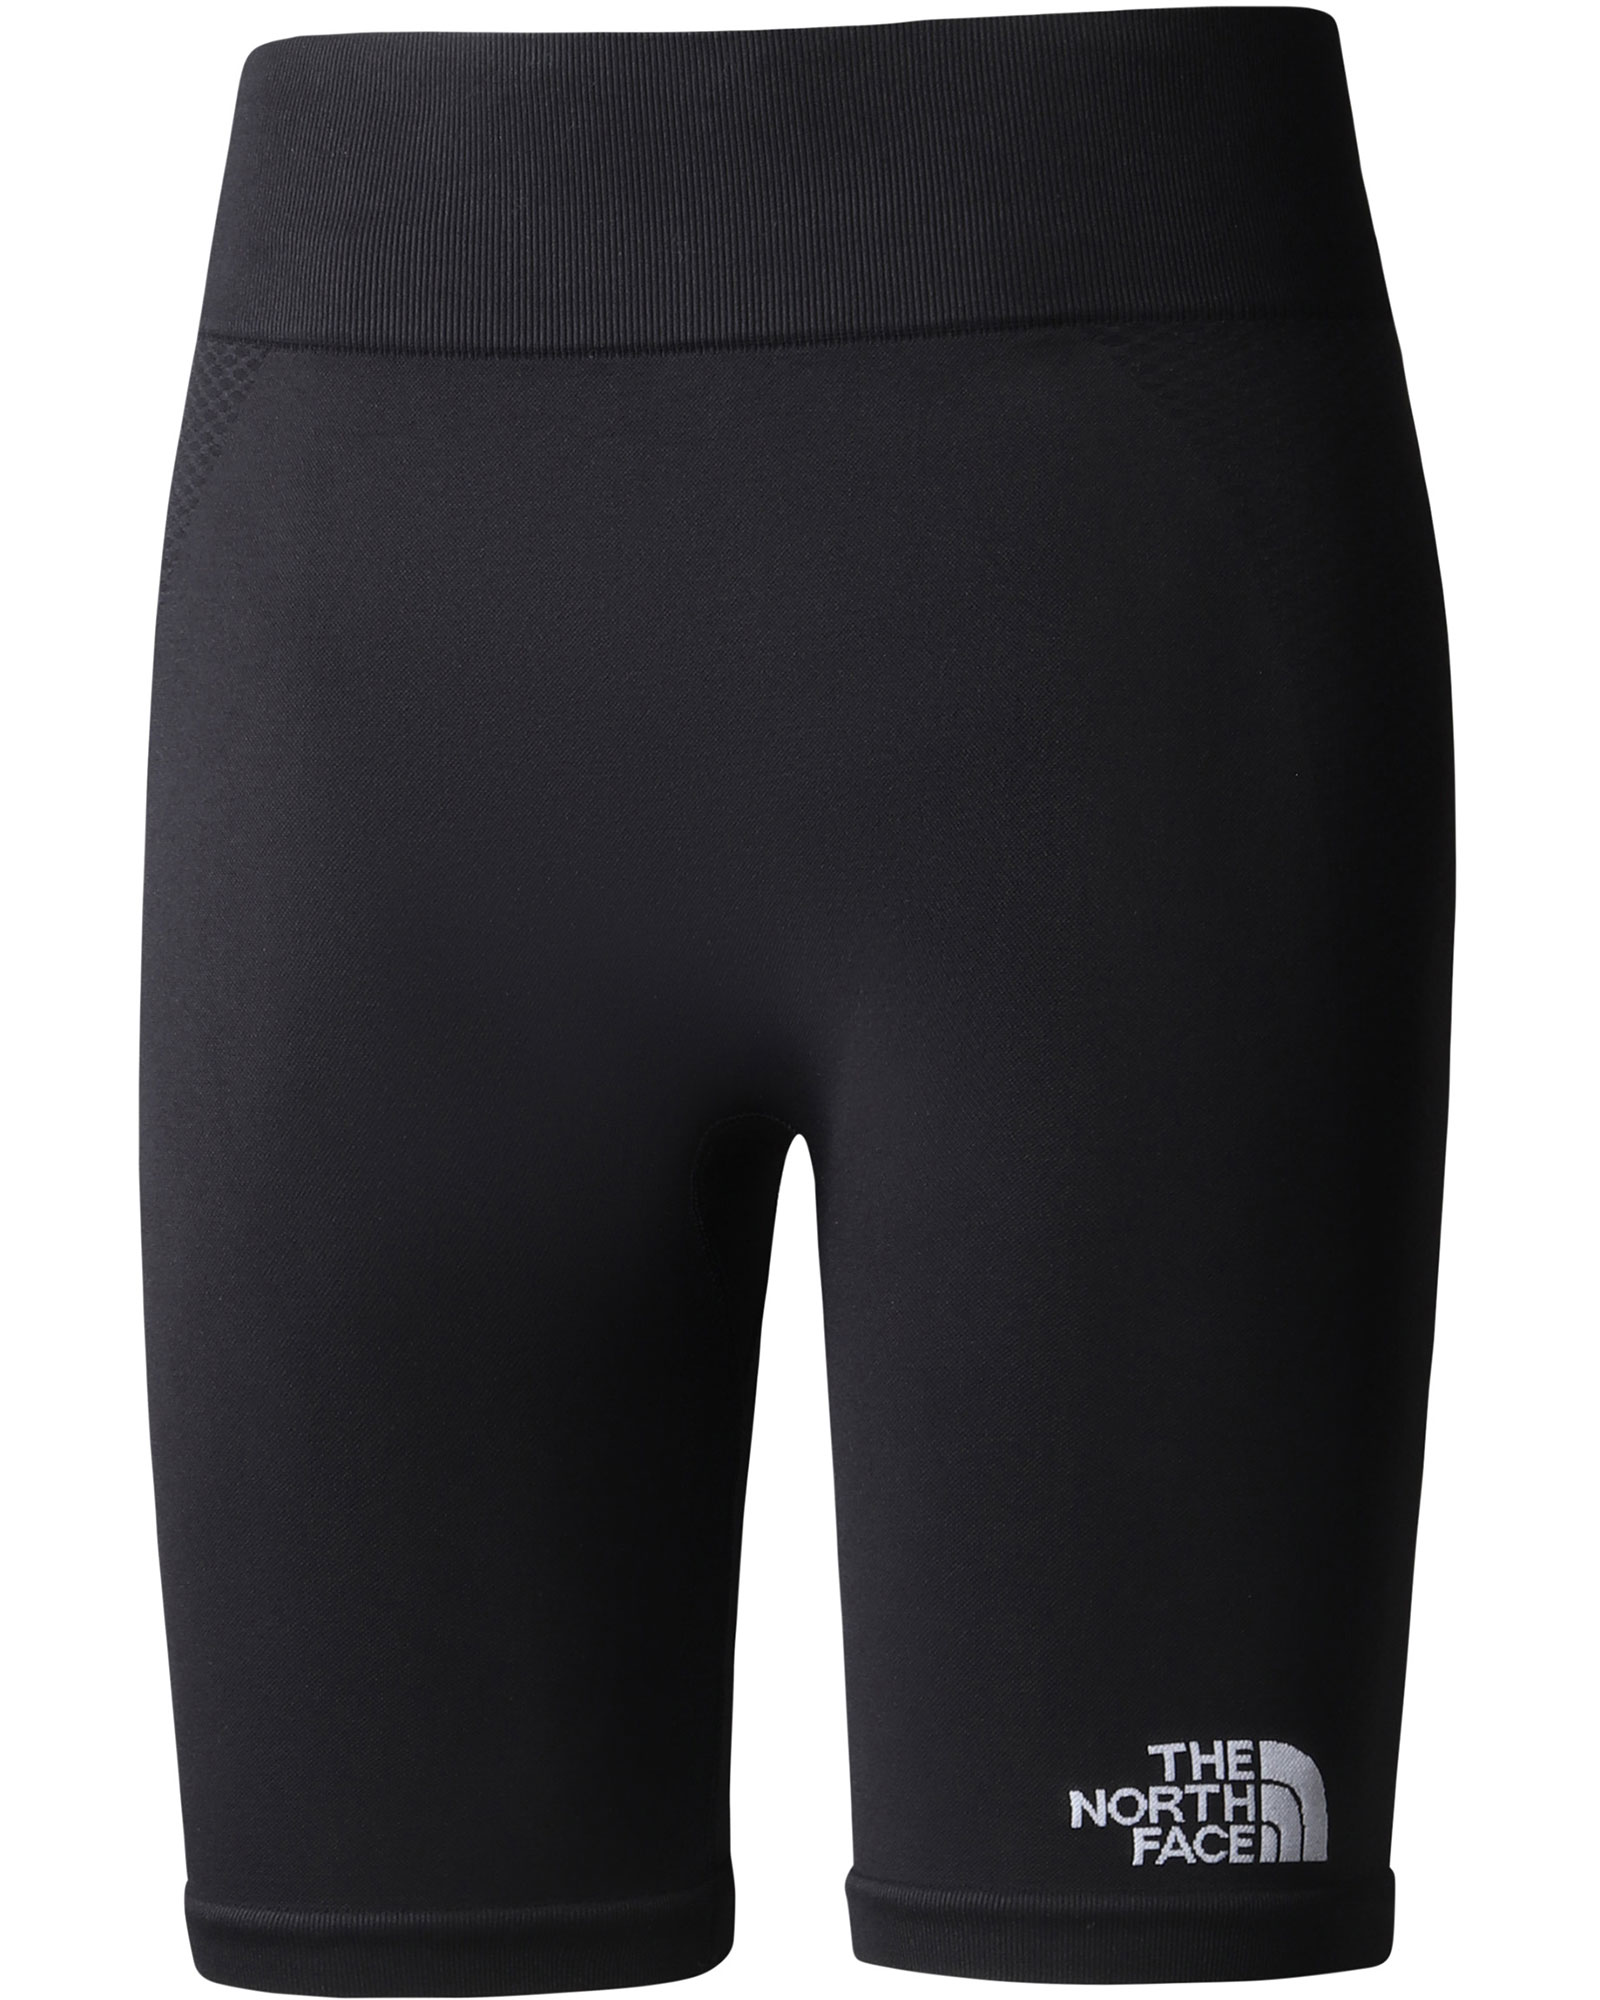 The North Face Womens Seamless Shorts